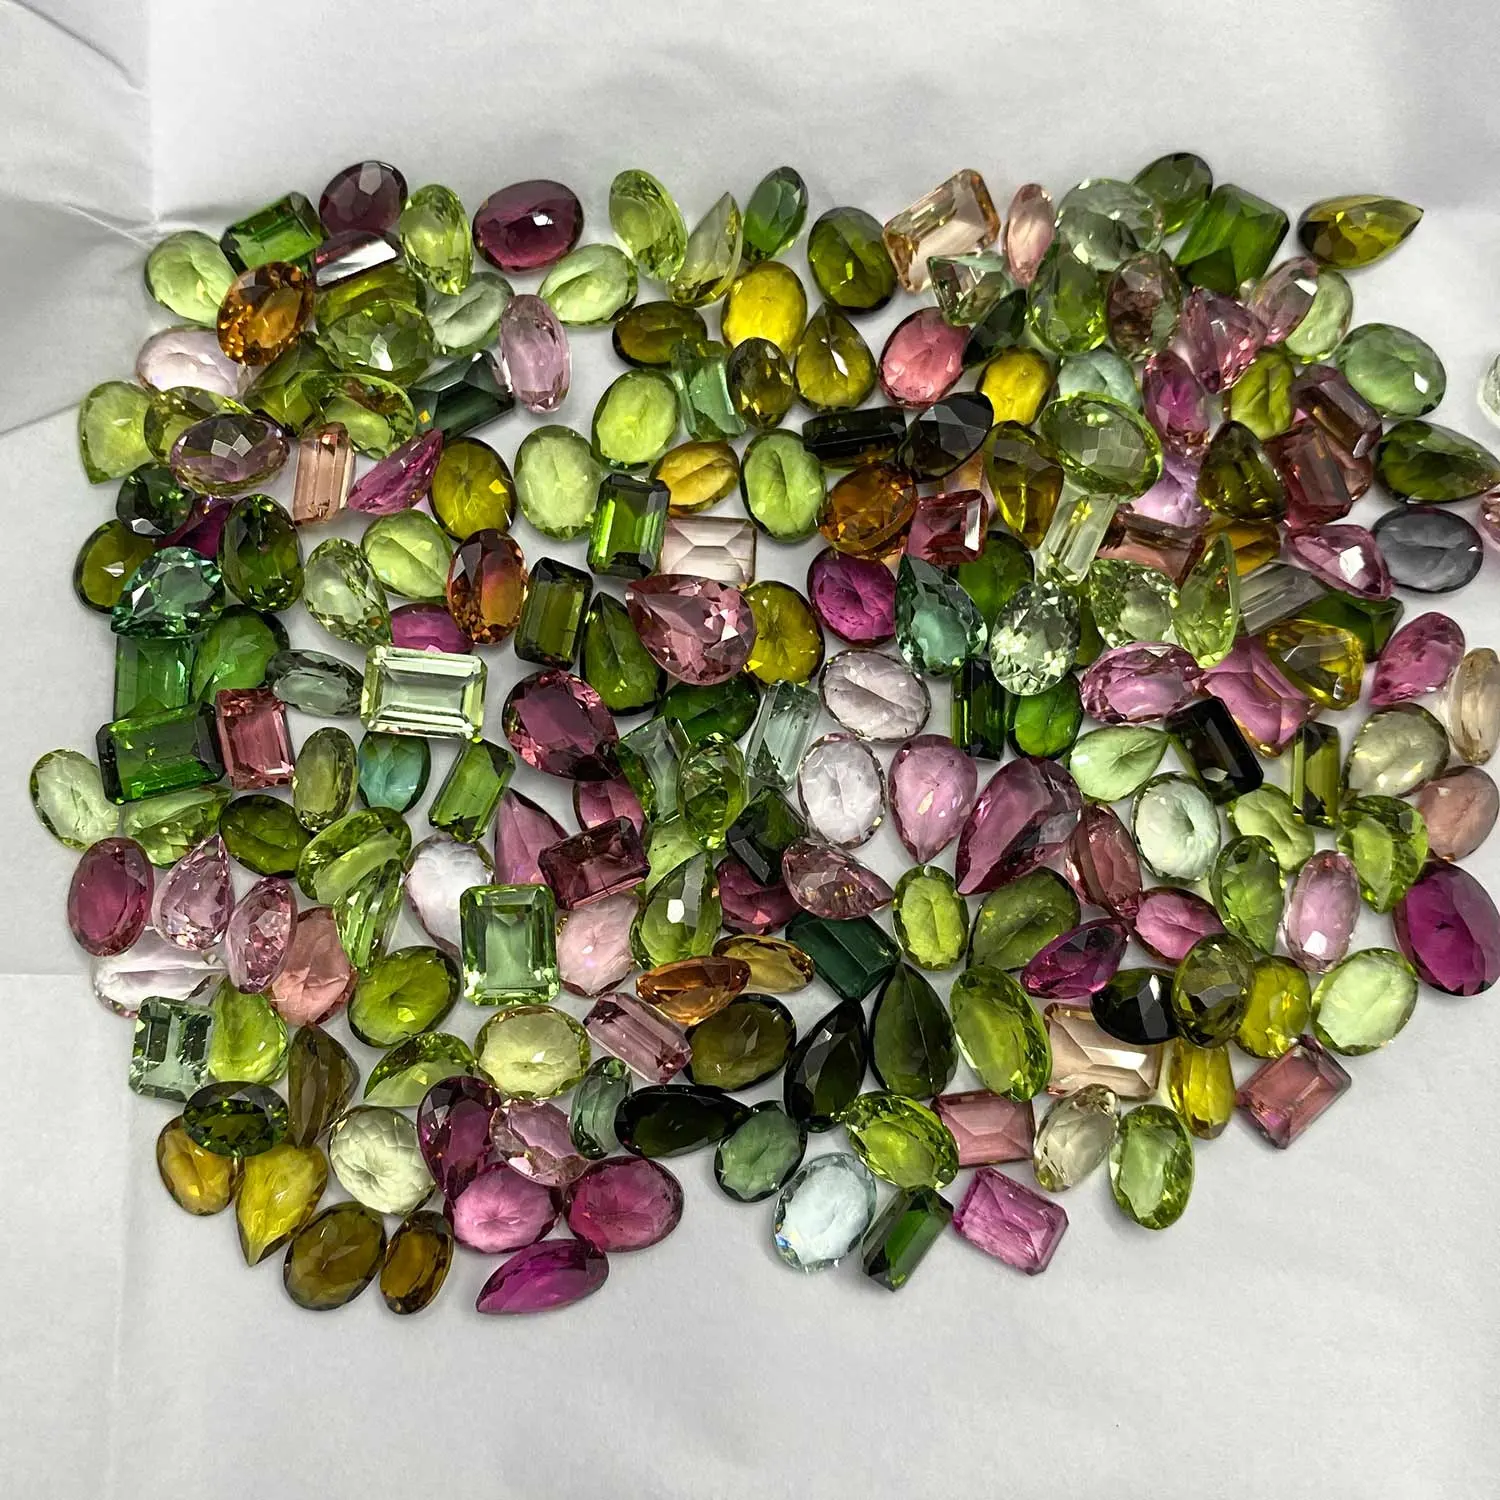 Ready To Ship Beautiful Colorful Gems Natural Multi Tourmaline Free Size Faceted Mixed Shape Loose Gemstones For Making Jewelry